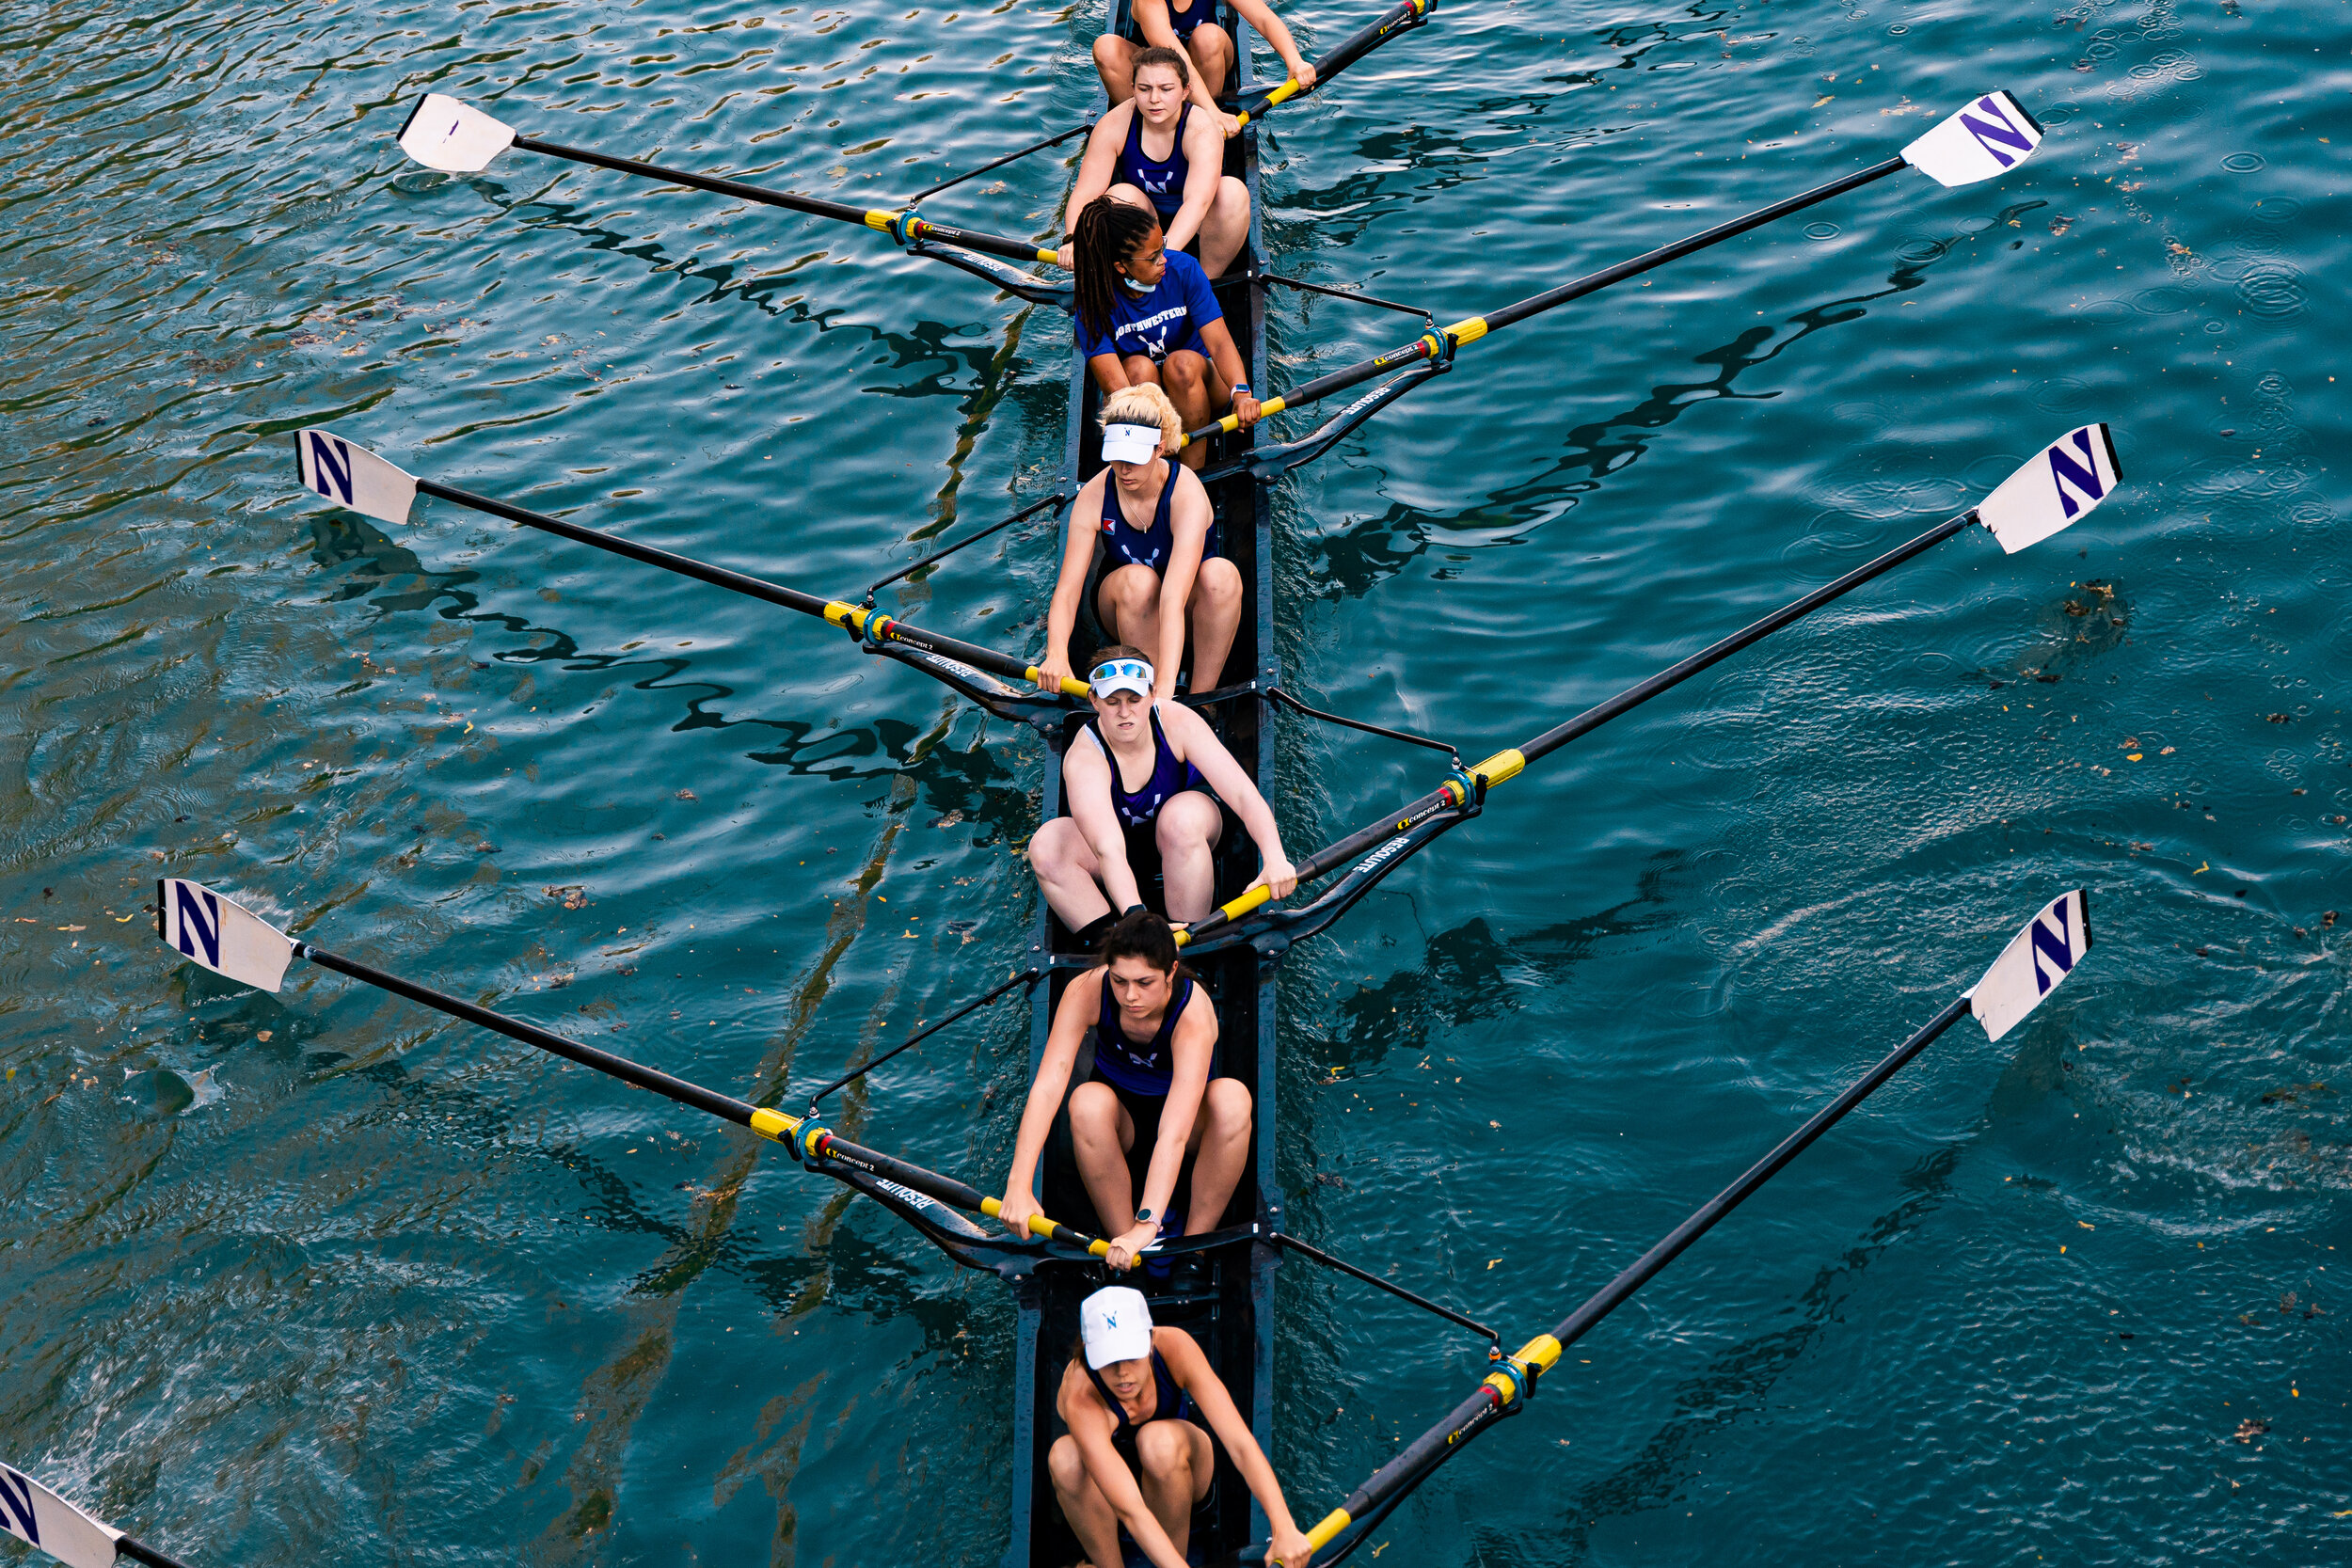 Northwestern's club rowing team competes at the Head of the